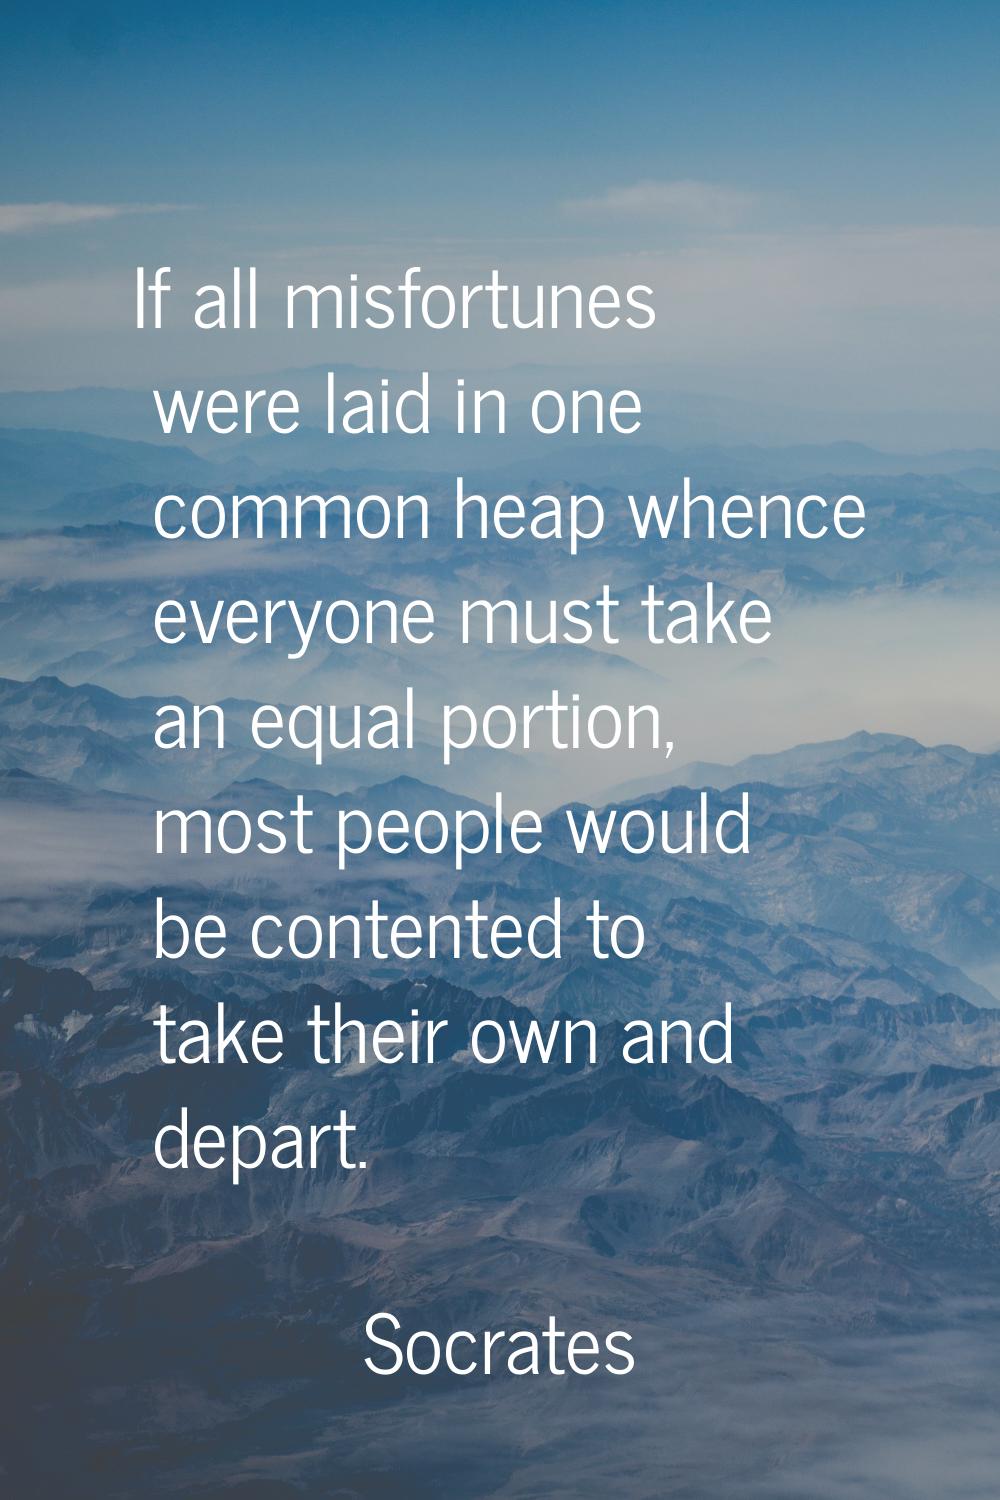 If all misfortunes were laid in one common heap whence everyone must take an equal portion, most pe